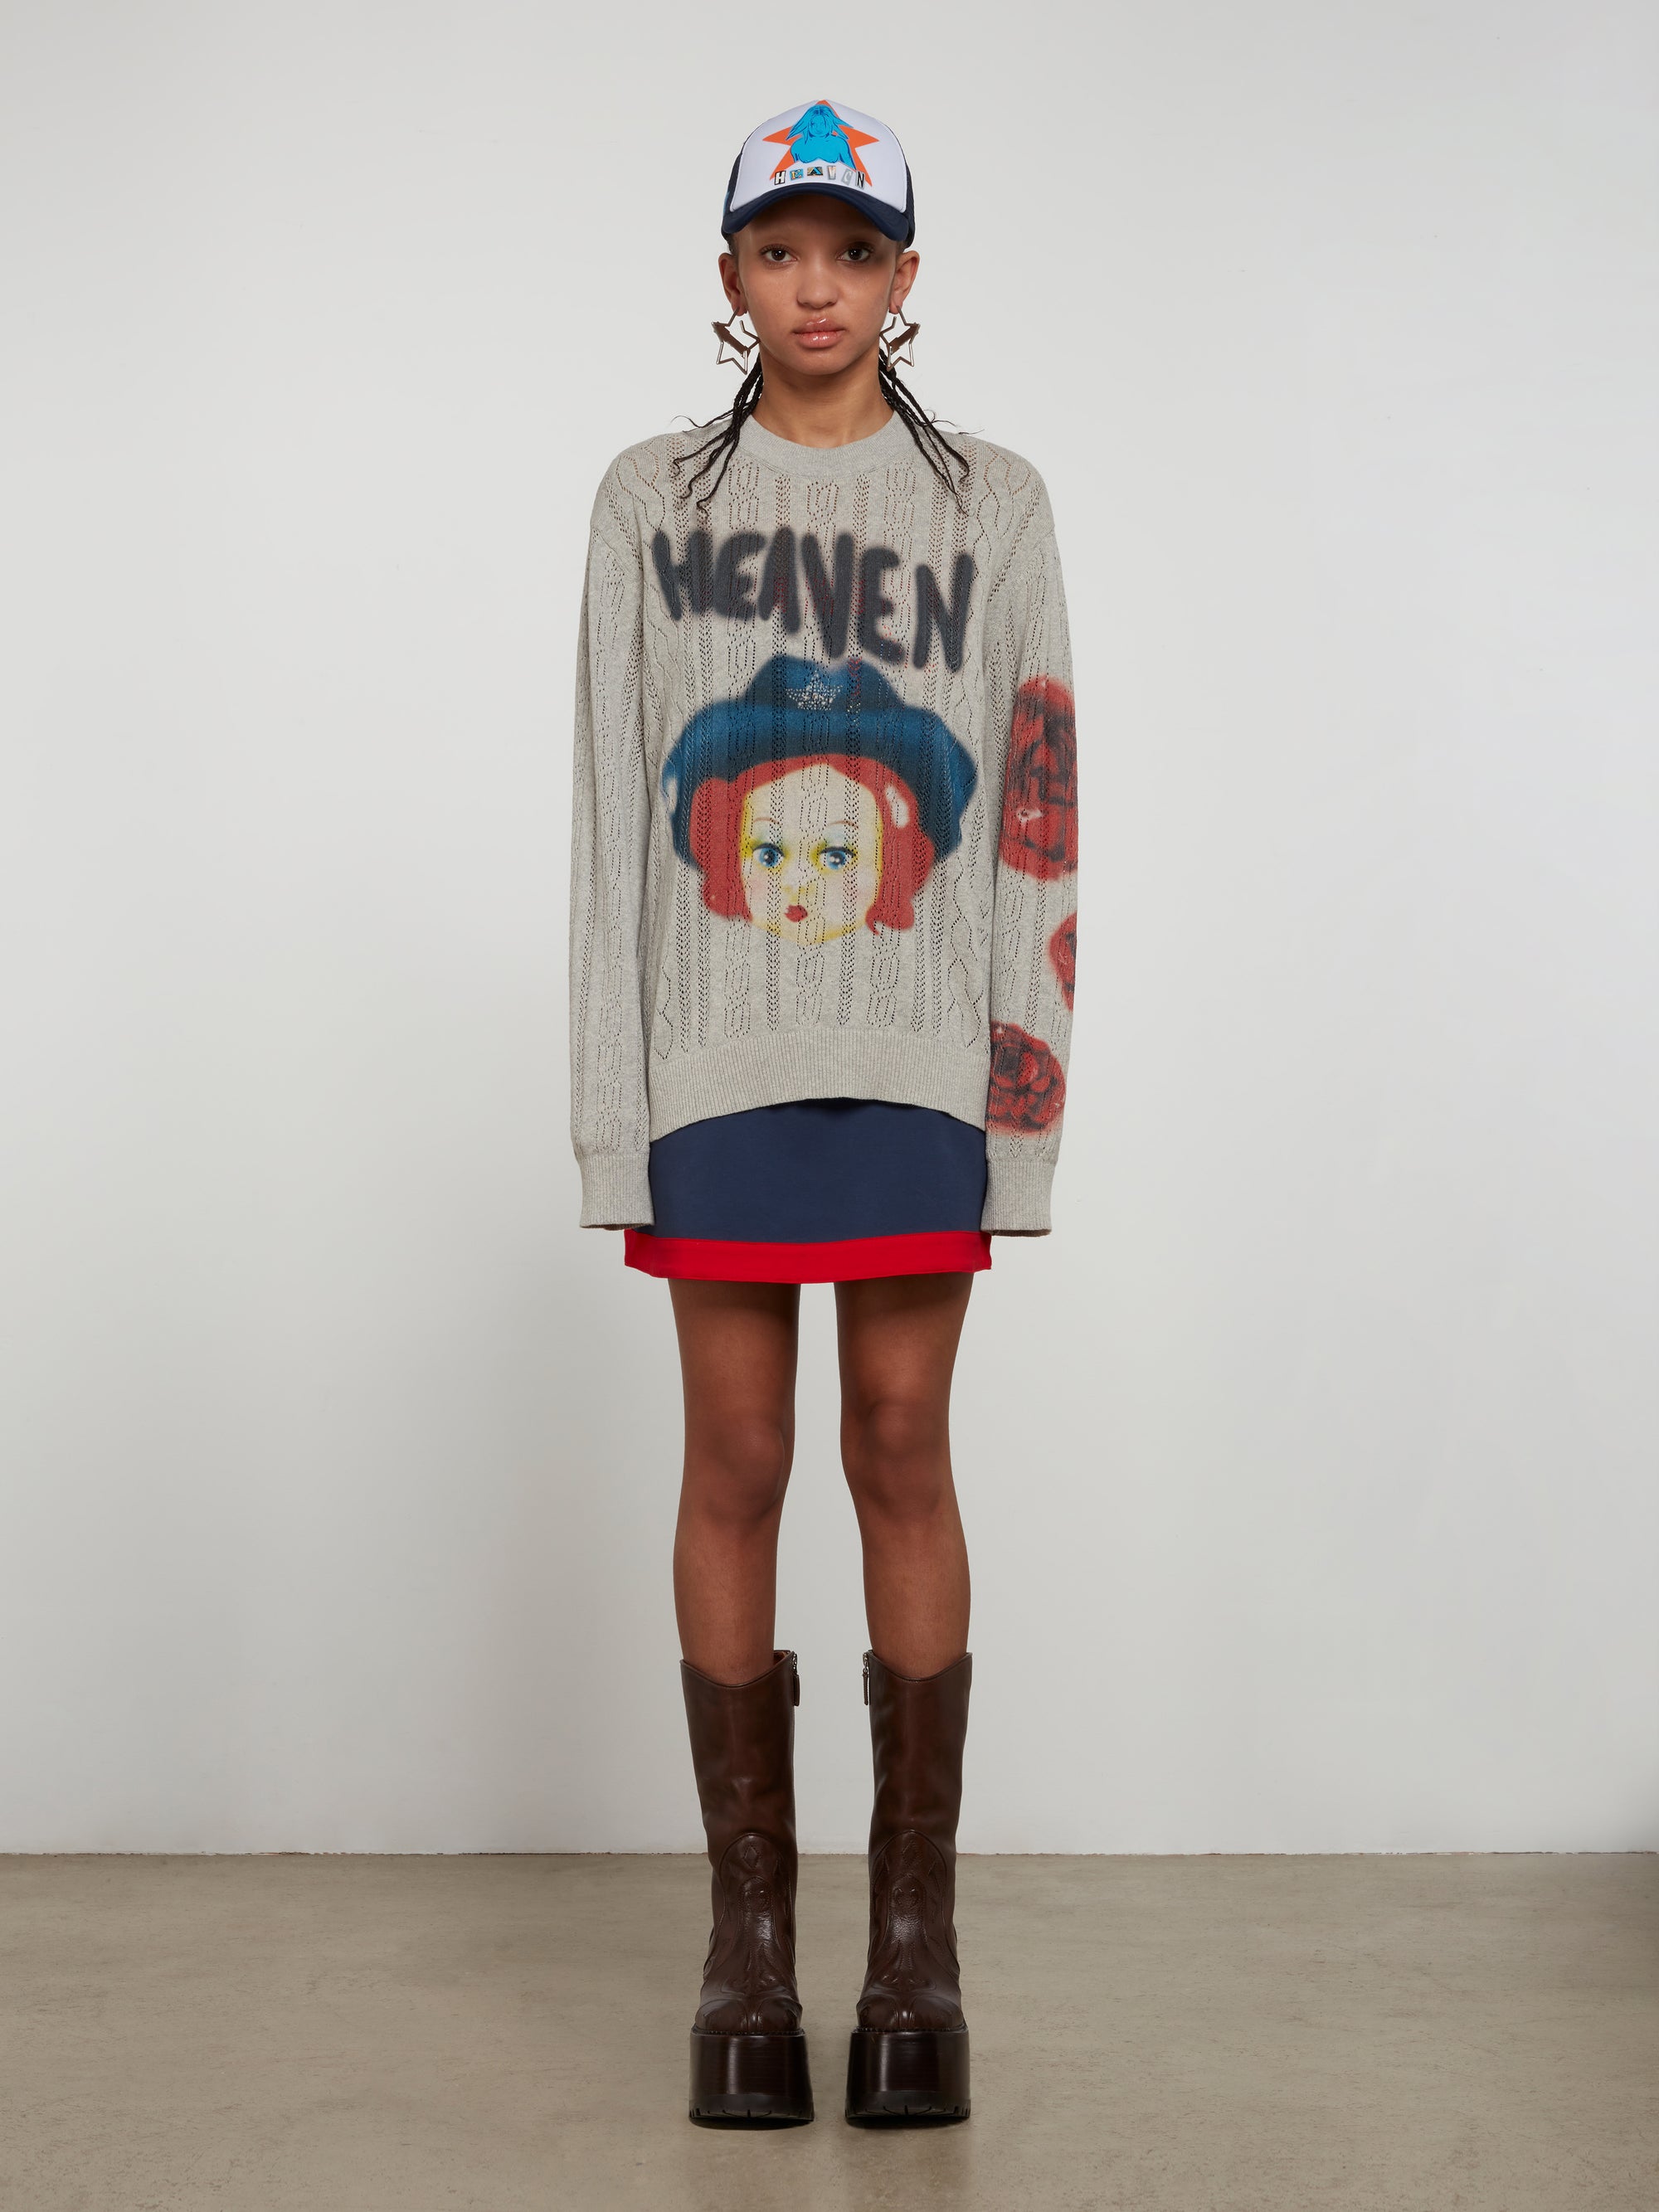 Heaven by Marc Jacobs - Women’s Airbrush Print Sweater - (Grey) view 5